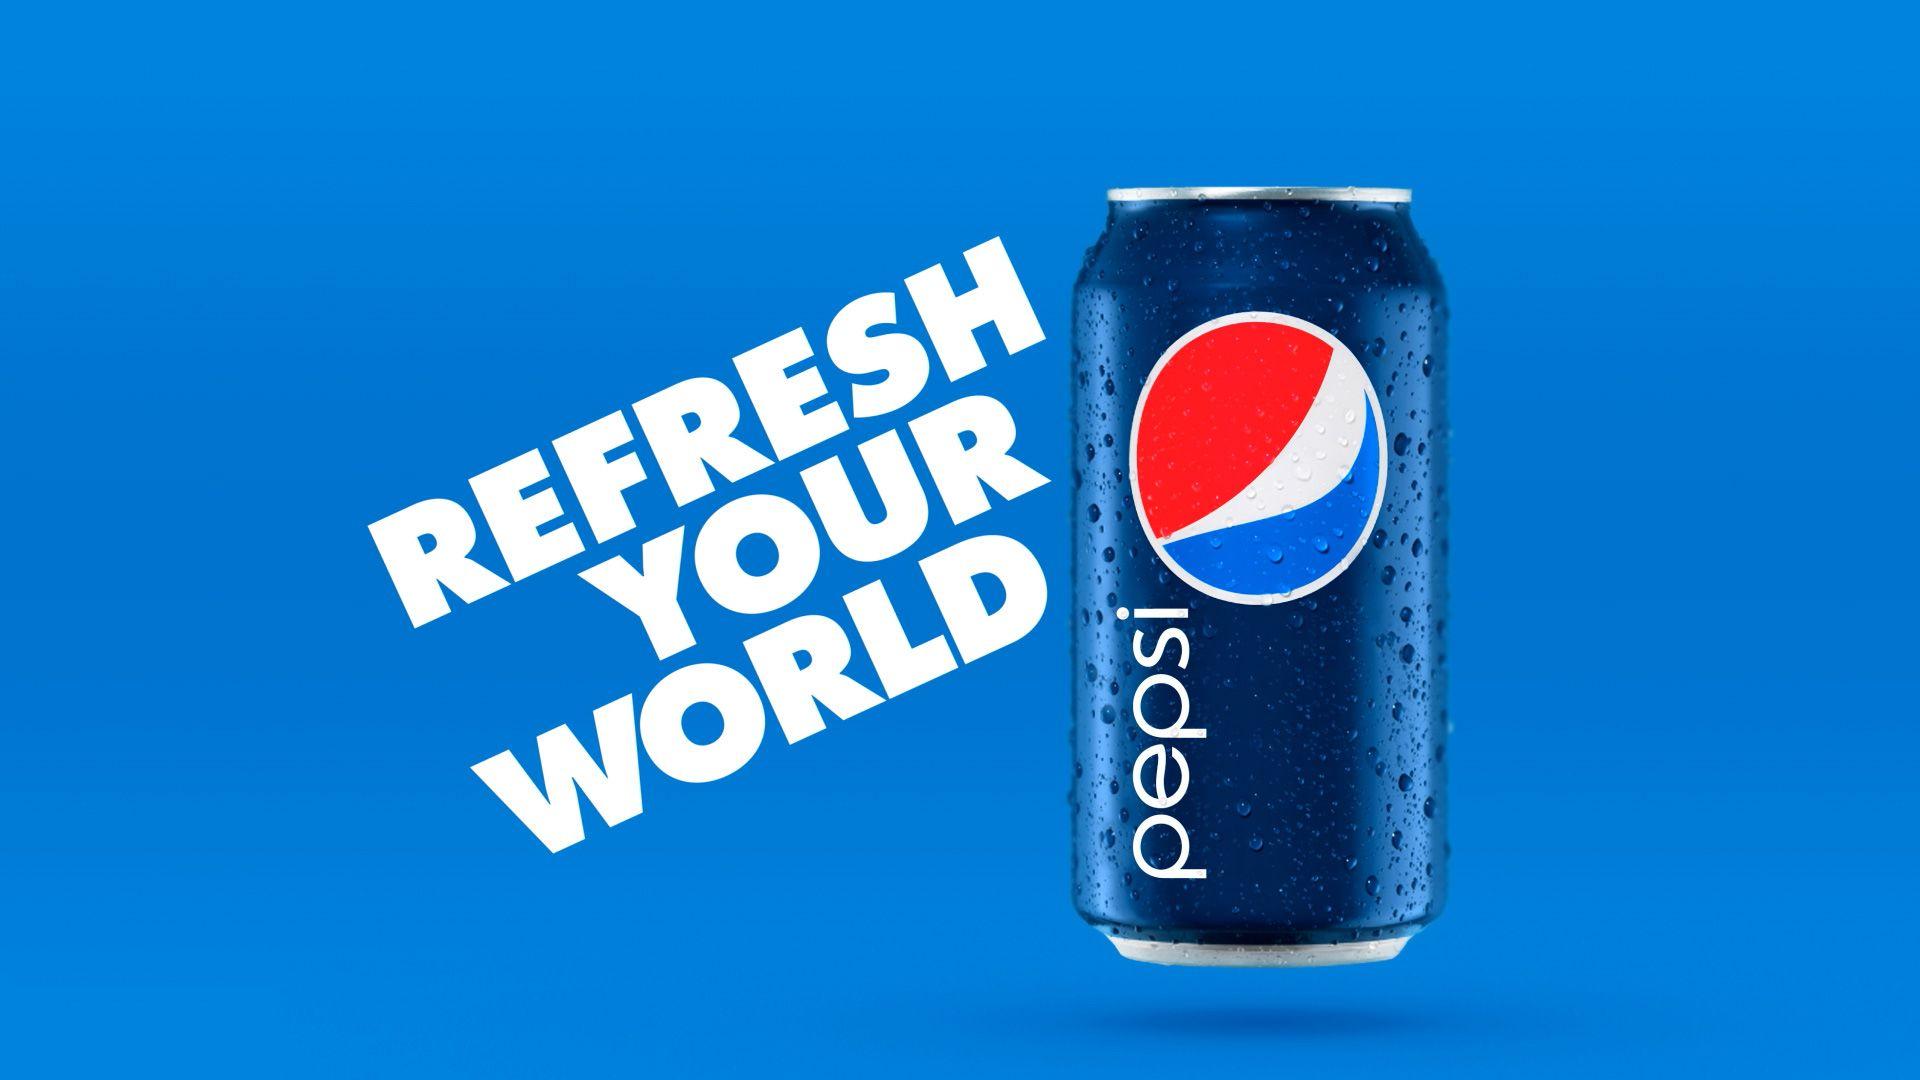 New Pepsi Can Logo - The Pepsi logo. A great example of logo evolution.